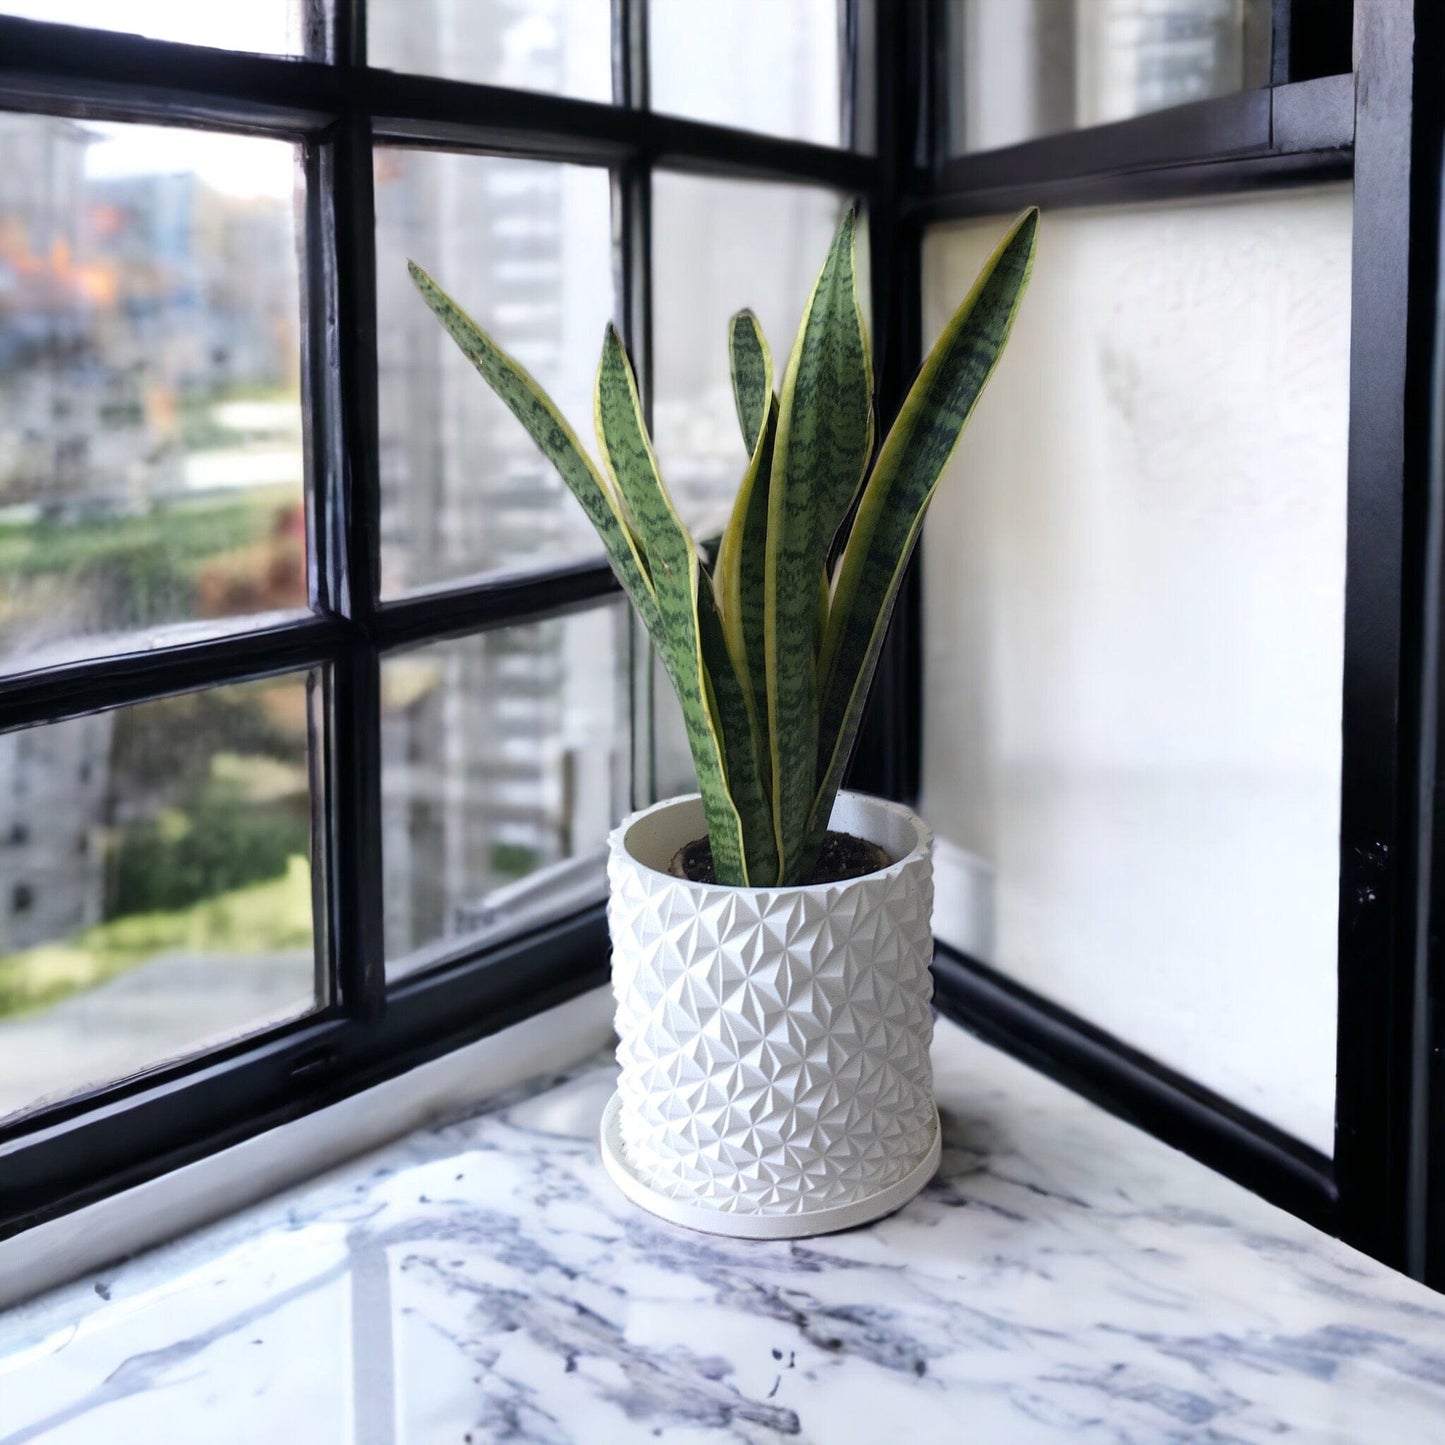 LOCALLY GROWN SNAKE PLANT IN WHITE 3D PRINTED ECO PLANTER - 8" x 16"